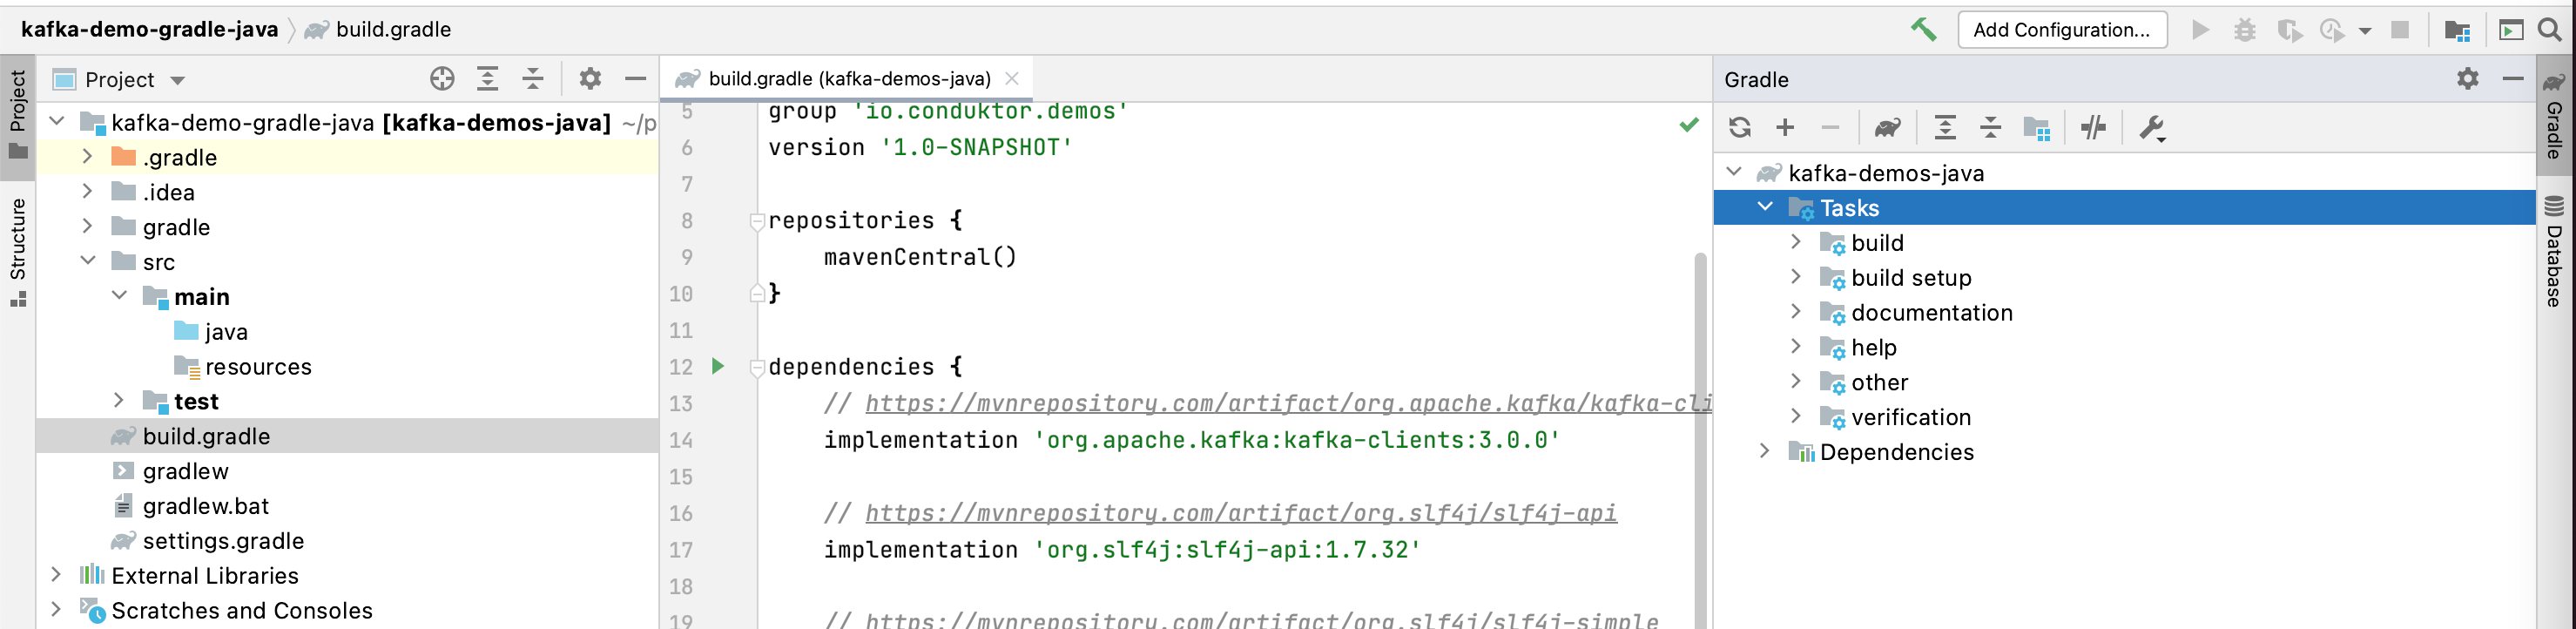 Screenshot showing how to load the Gradle changes to your Kafka project using the right hand menu.